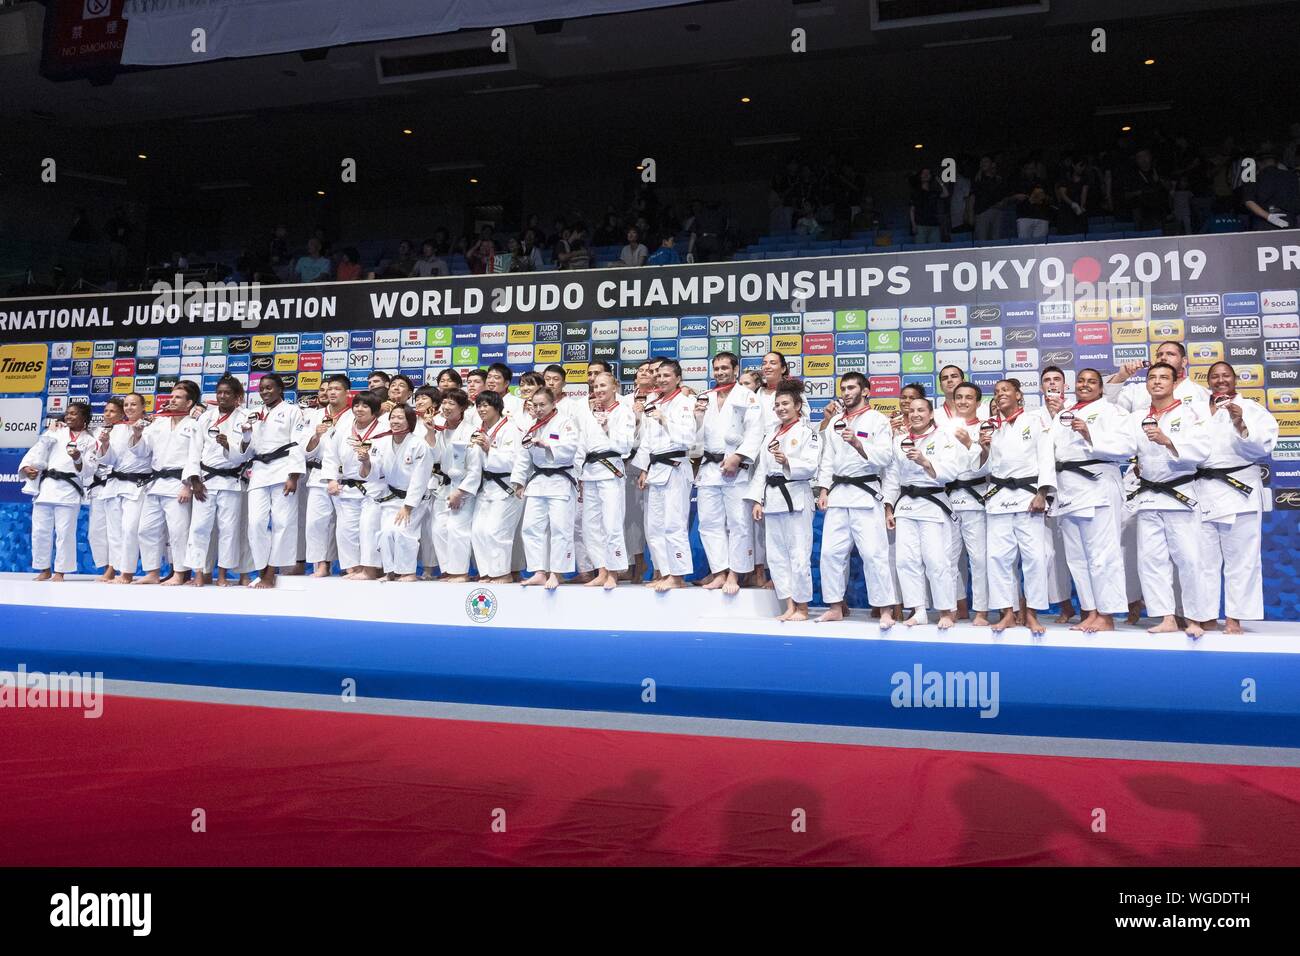 Tokyo, Japan. 1st Sep, 2019. (L to R) Silver medalists France team, gold medalists Japan team, bronze medalists Russia team and Brazil team, pose for the cameras during the award ceremony for the Mixed Team competition at the World Judo Championships Tokyo 2019 in the Nippon Budokan. The World Judo Championships Tokyo 2019 is held from August 25 to September 1st. Japanese Prime Minister Shinzo Abe, Tokyo Governor Yuriko Koike and Tokyo 2020 Olympic President Yoshiro Mori attended the final day of competitions and congratulated the winners during the award ceremony. (Credit Image: © Rodrigo Stock Photo